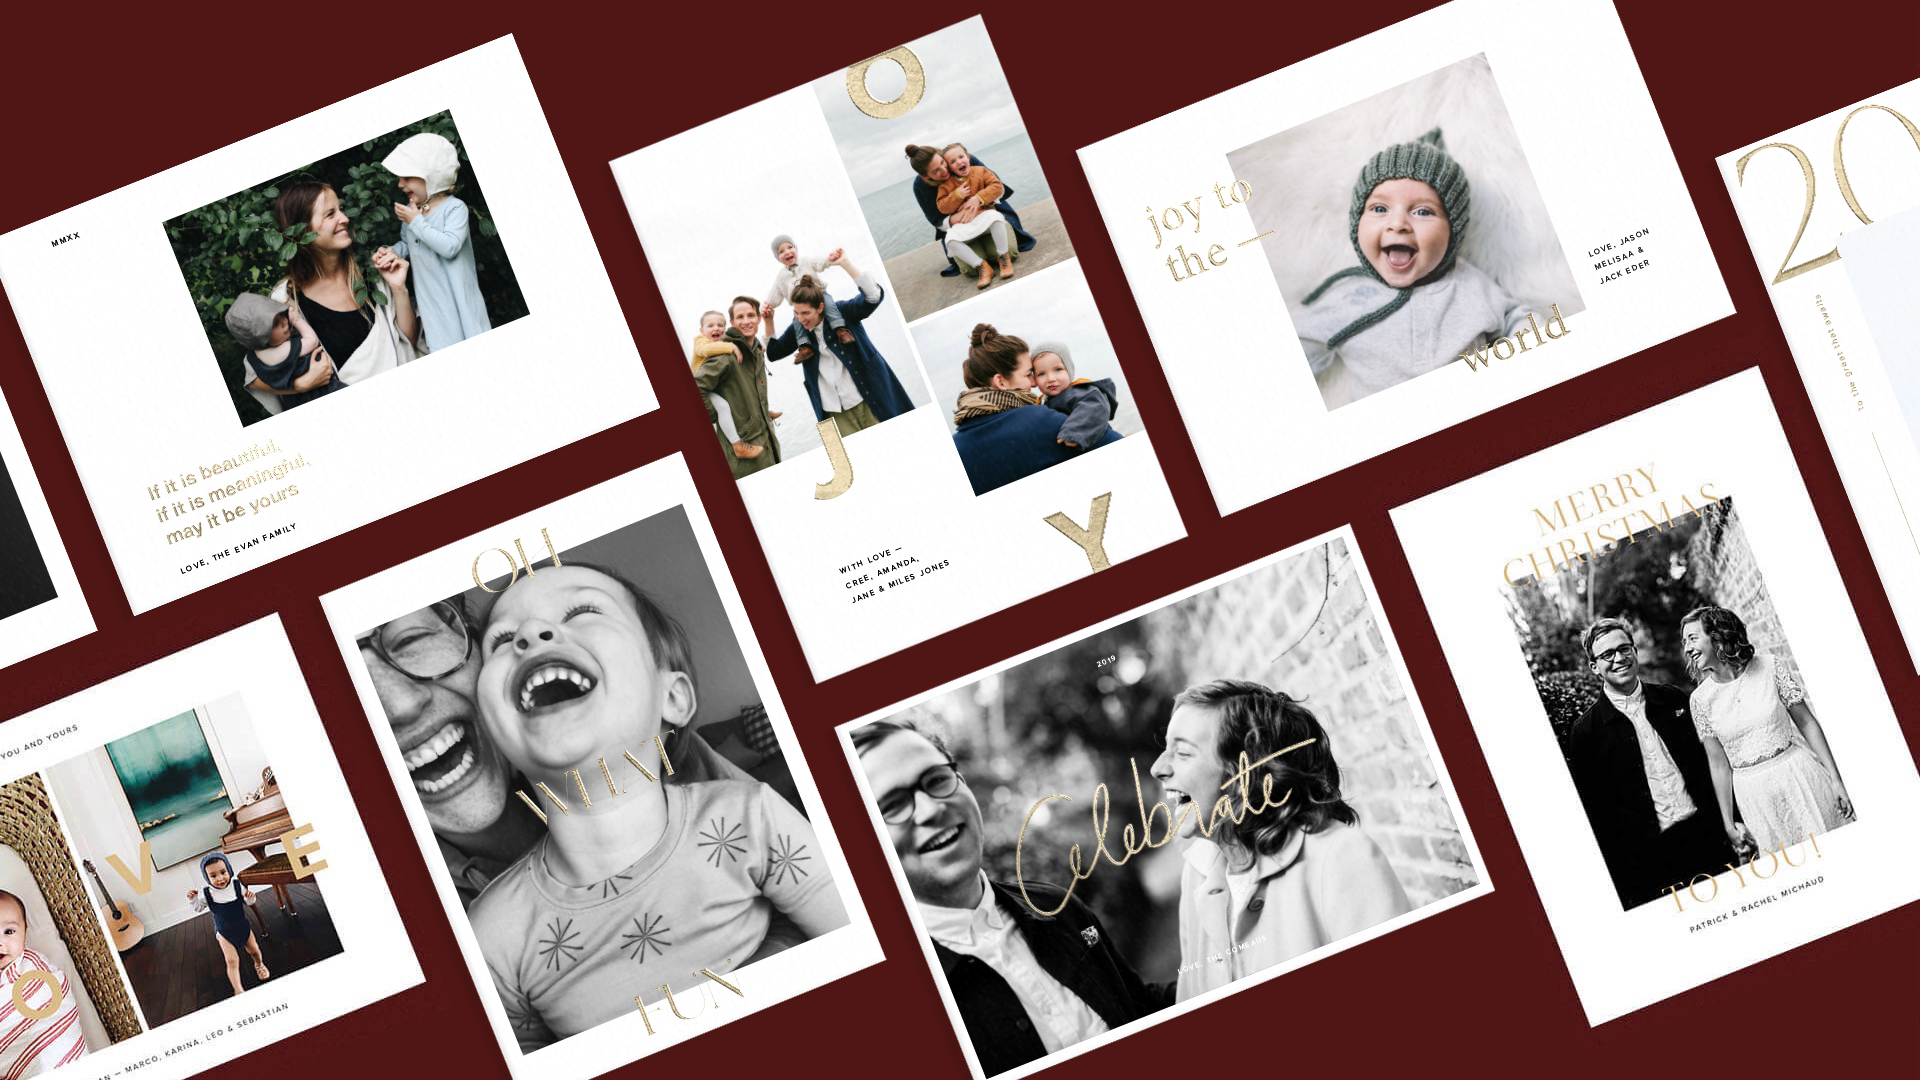 9 Creative Holiday Photo Ideas For Cards | Artifact Uprising Regarding Holiday Card Templates For Photographers